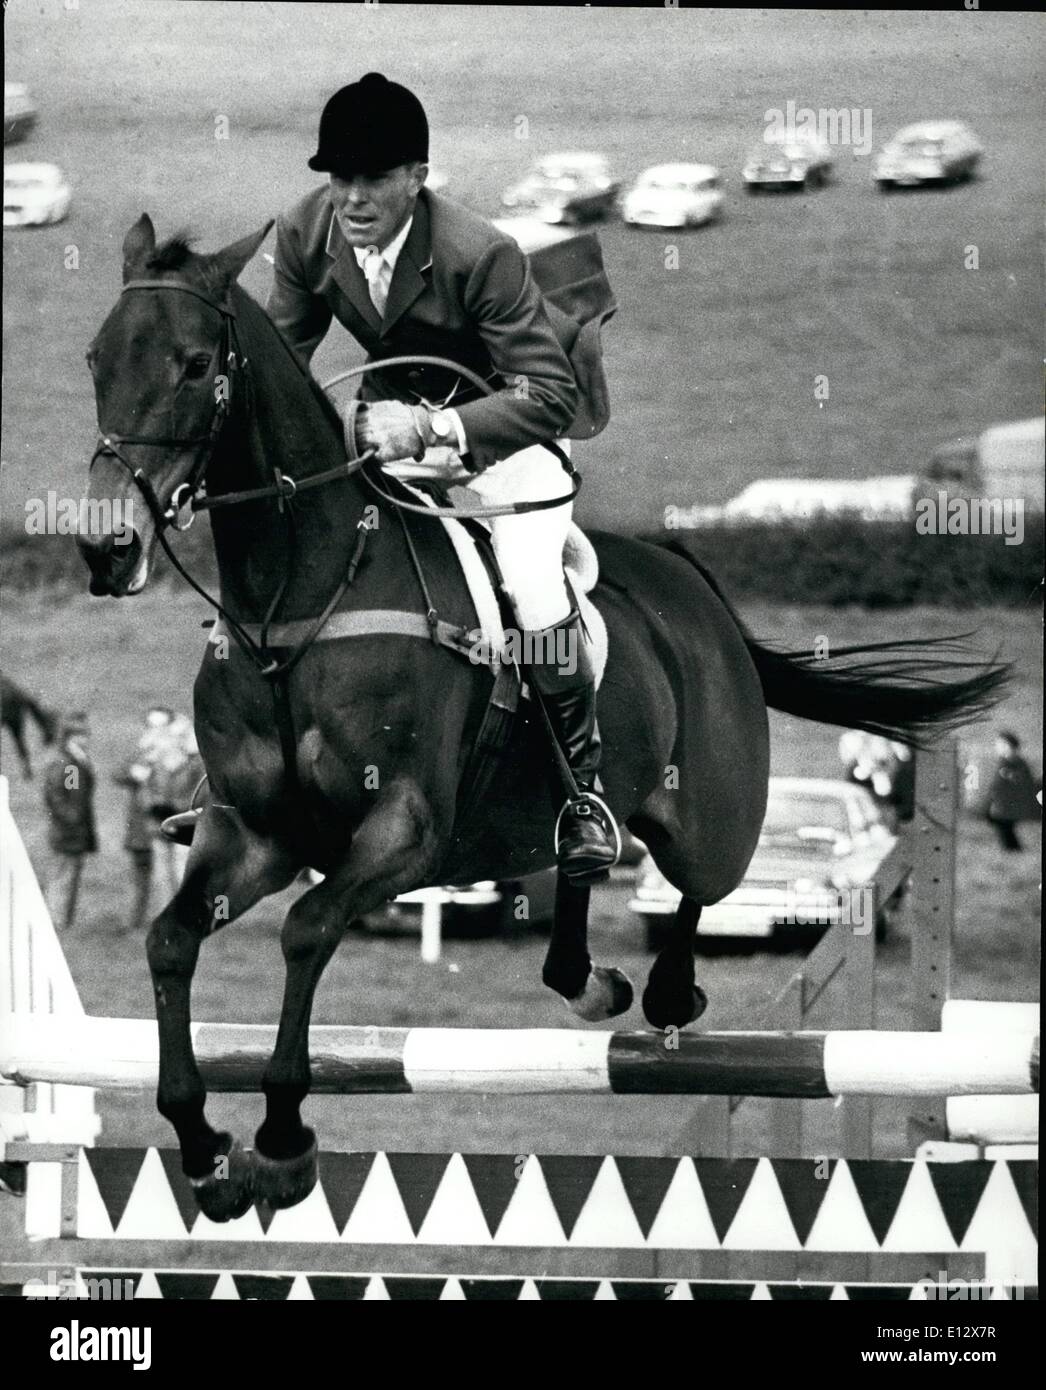 Feb. 25, 2012 - Members of the U.S.A Olympic Team take Part in the Cropwell Bishop Horse Trials - Nottingham.: Mike Plumb a member of the American Equest, Team seen during the jumping section of the Cropwell Bishop Horse Trials on his horse Frelicsome. Stock Photo